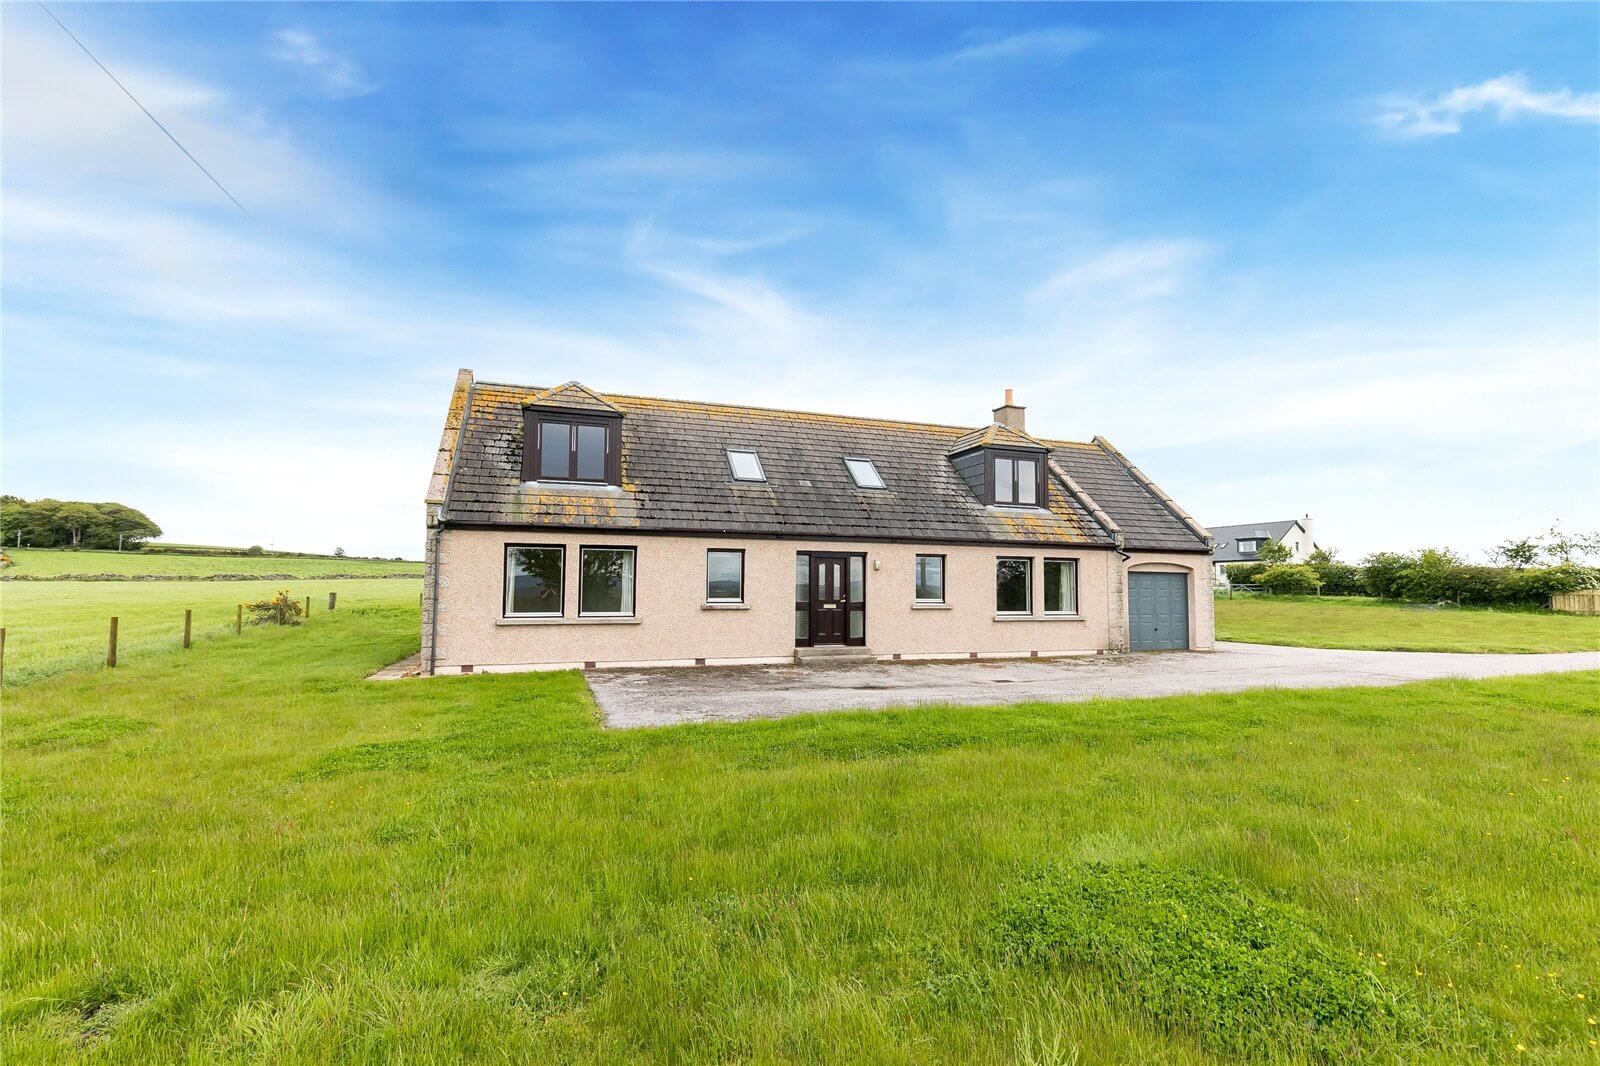 Our latest properties for sale and to let (14th June 2019)